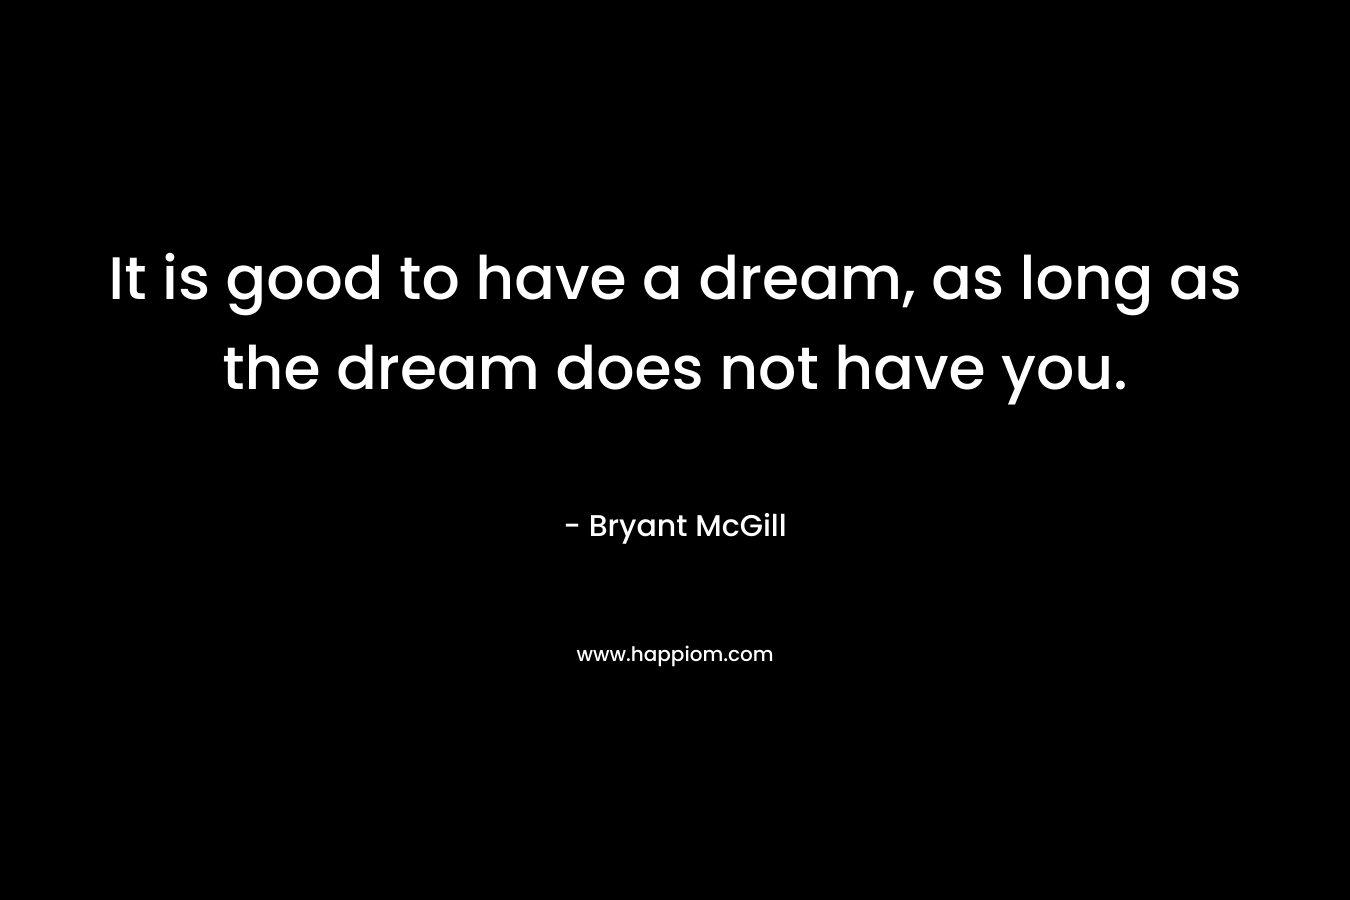 It is good to have a dream, as long as the dream does not have you. – Bryant McGill